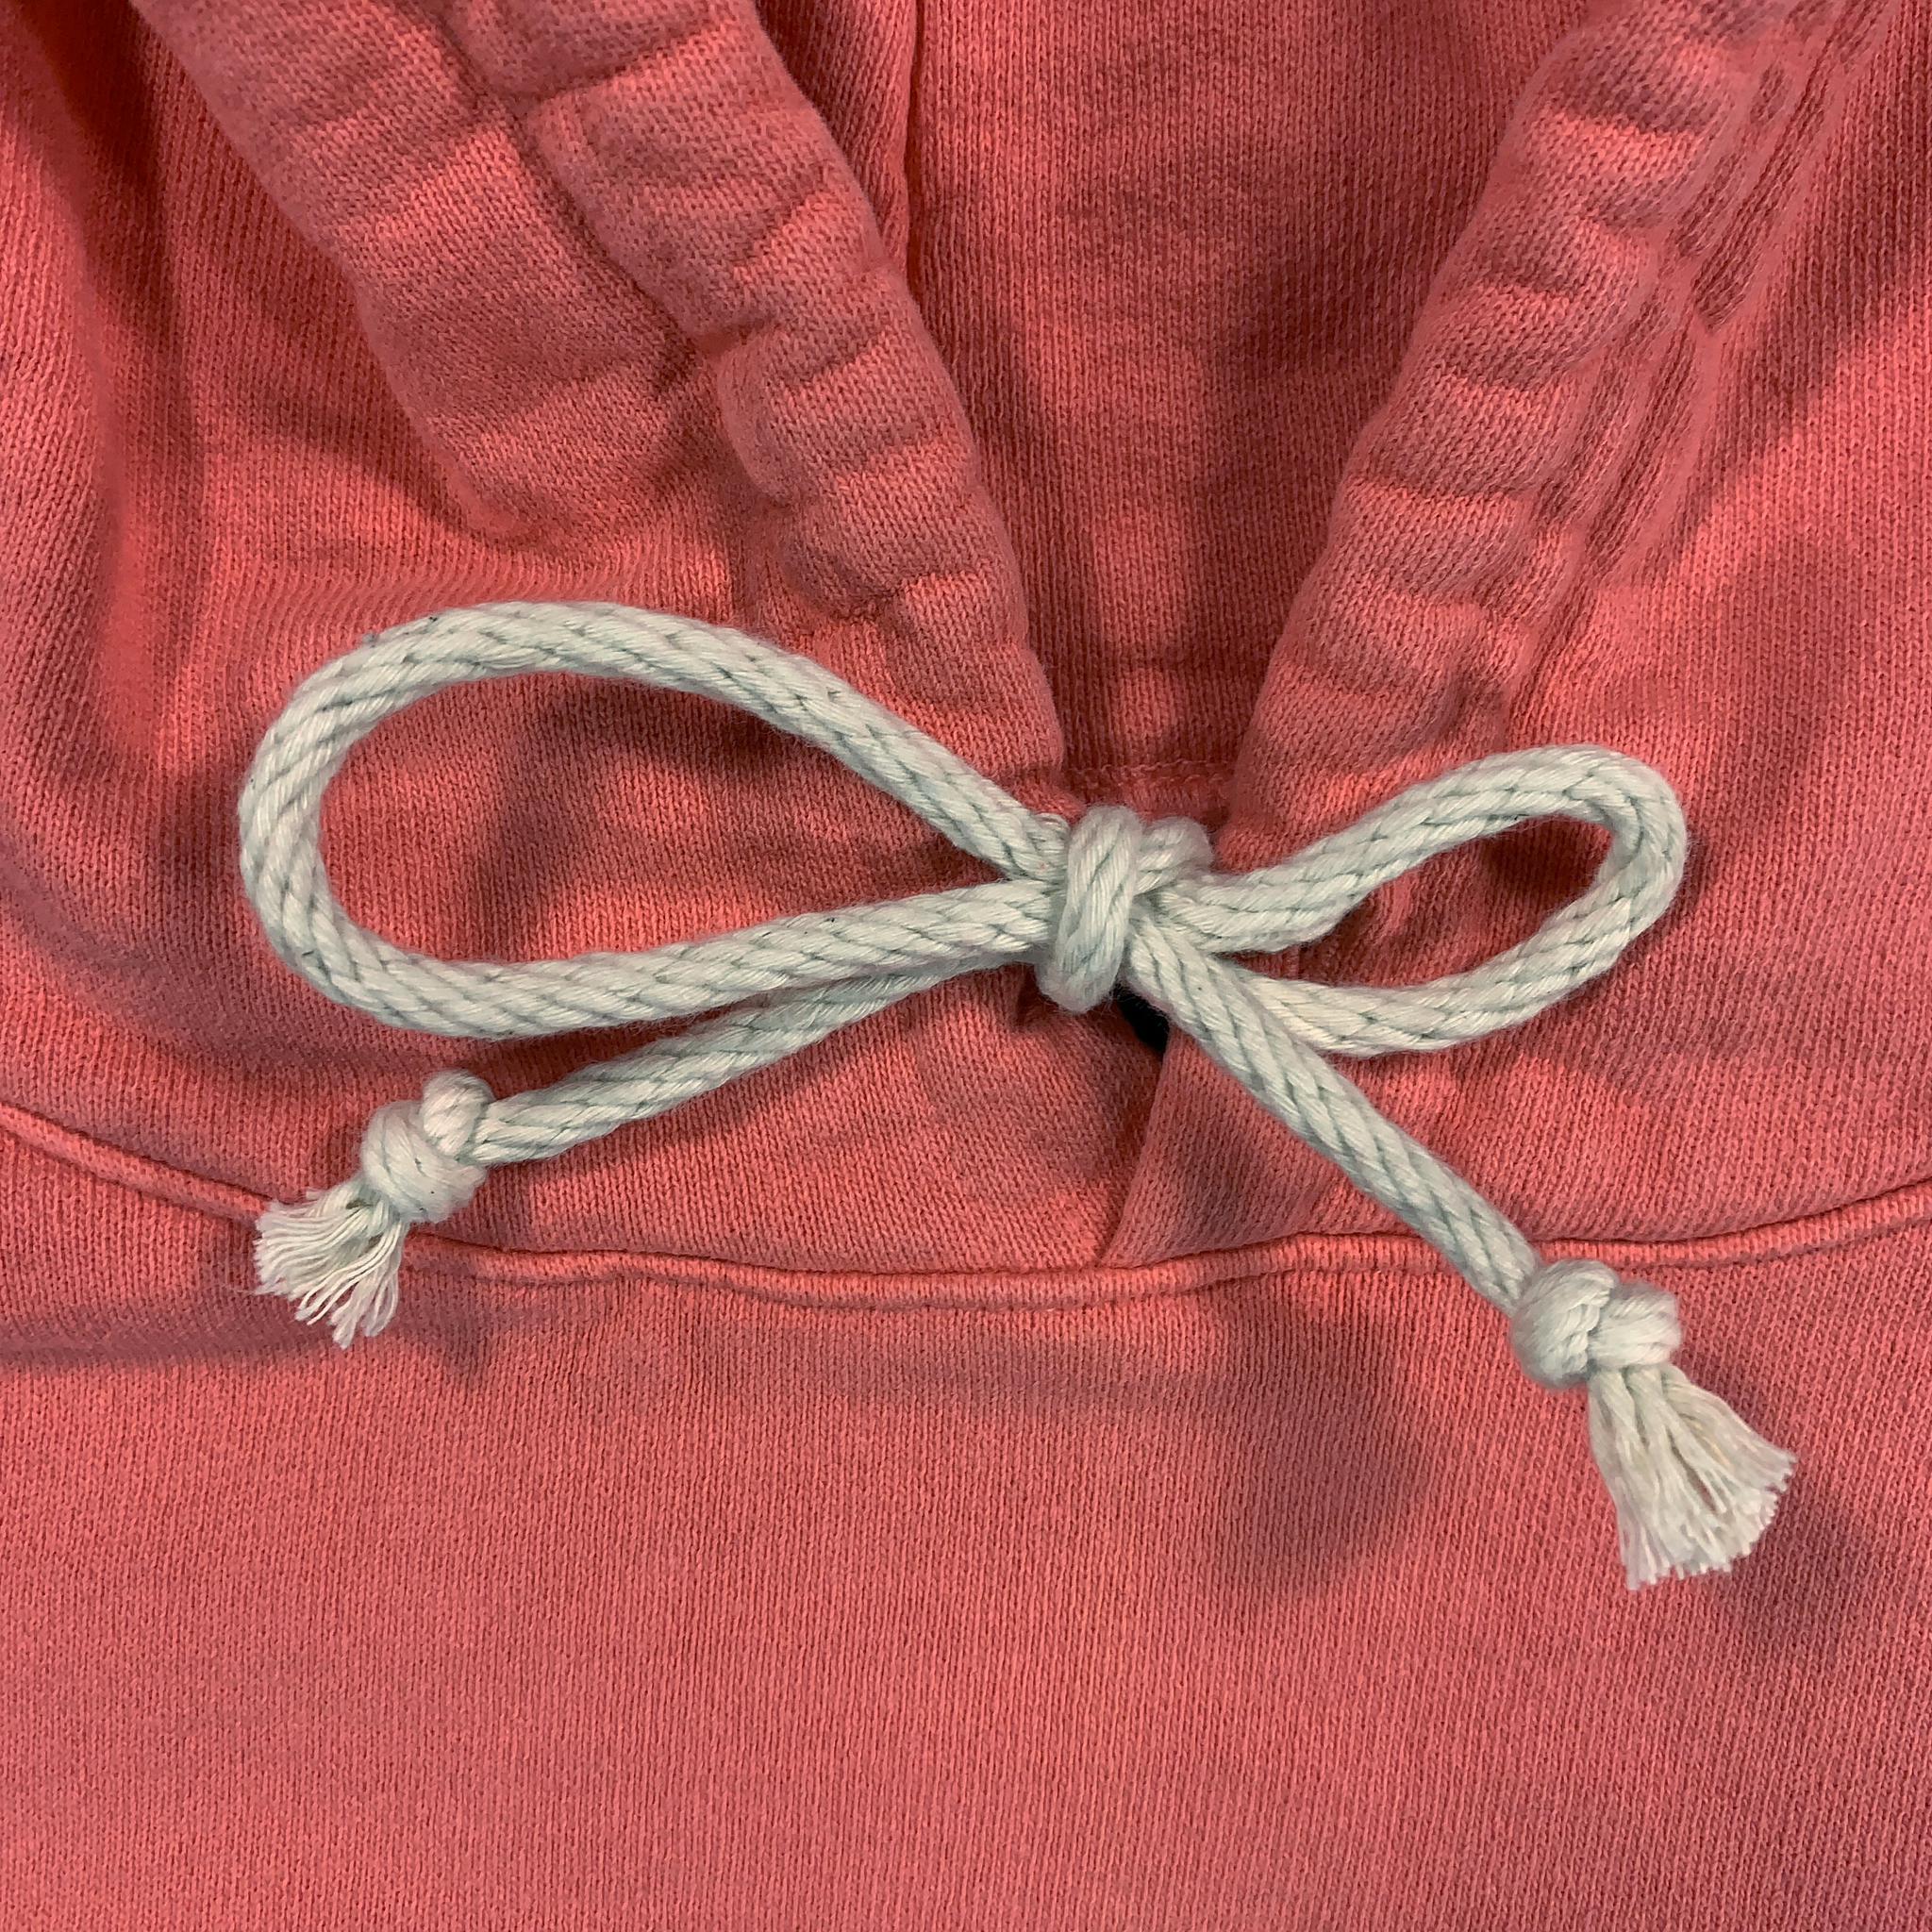 Embroidered Hoodie - 2XL